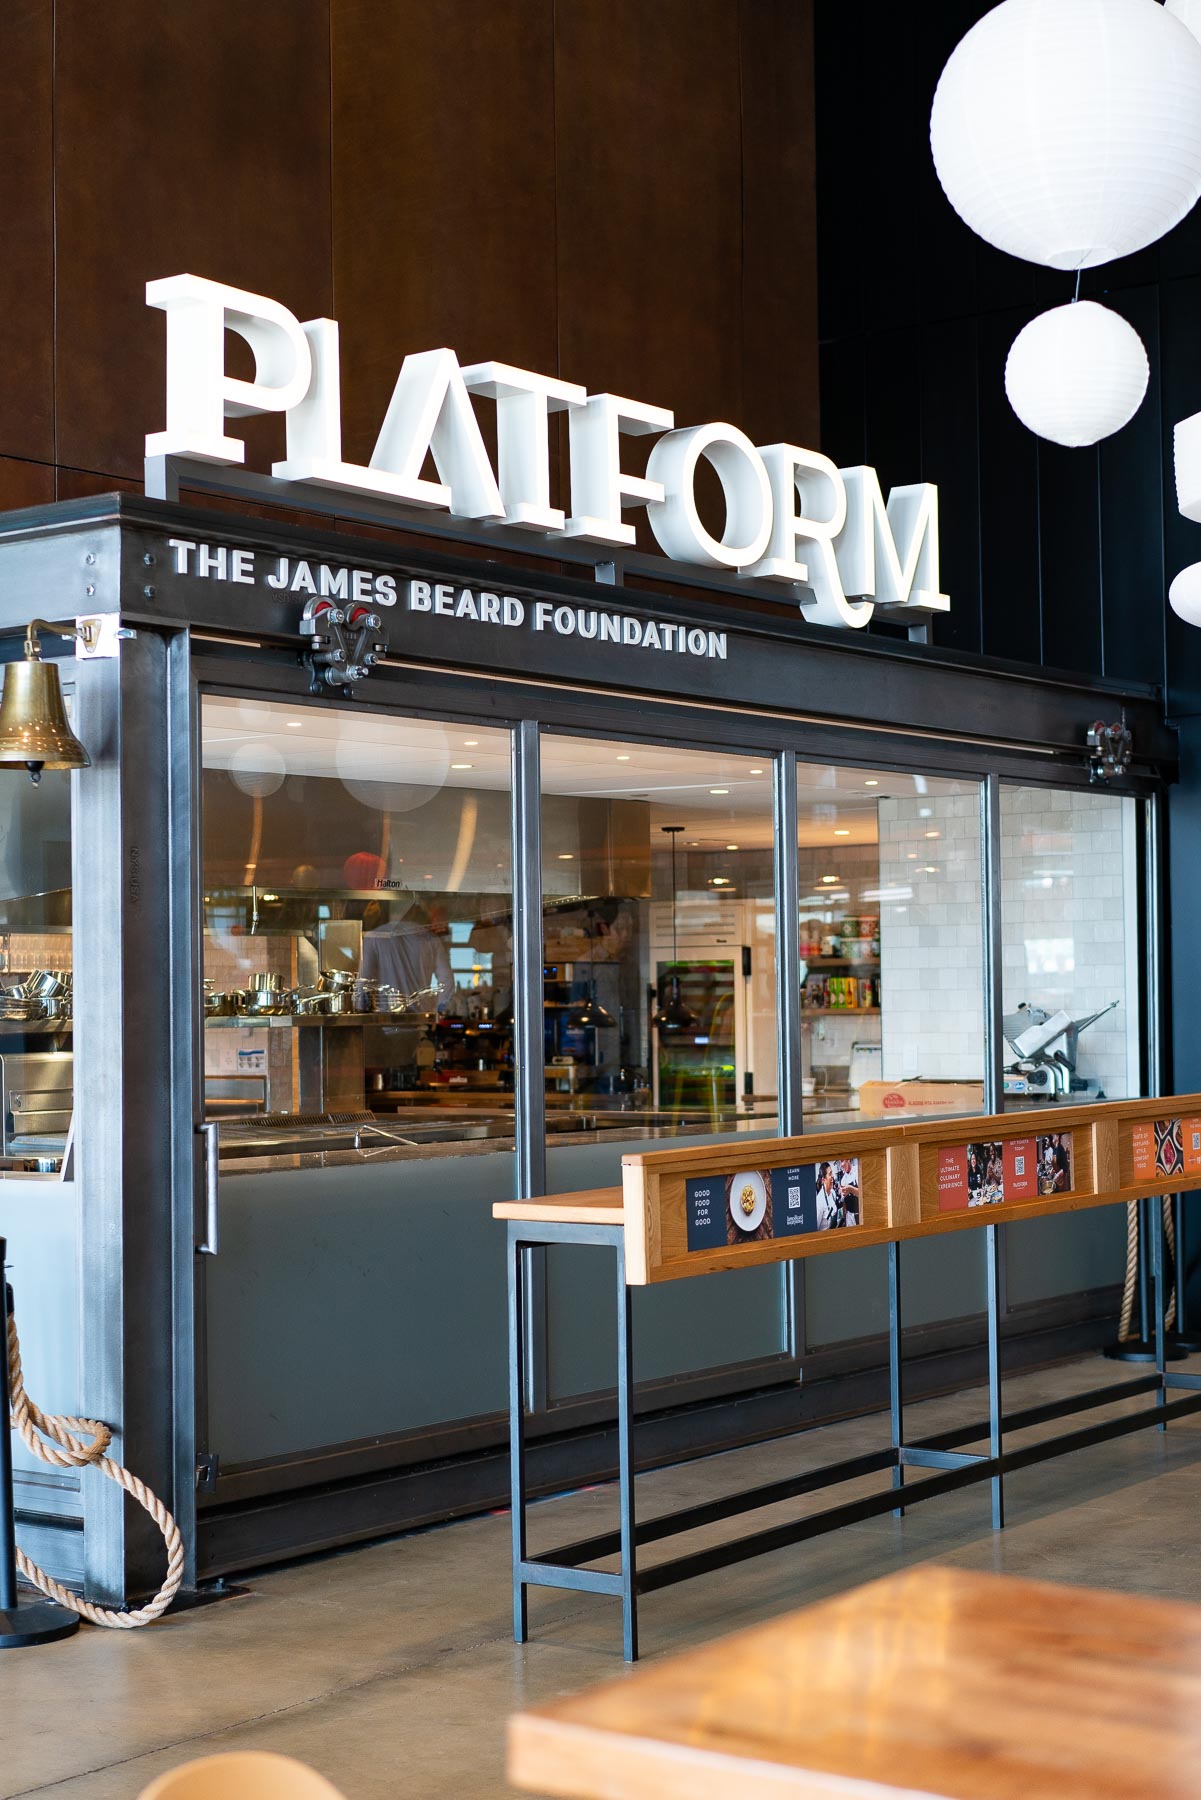 Platform, James Beard Foundation, Best things to do in NYC on a Rainy Day